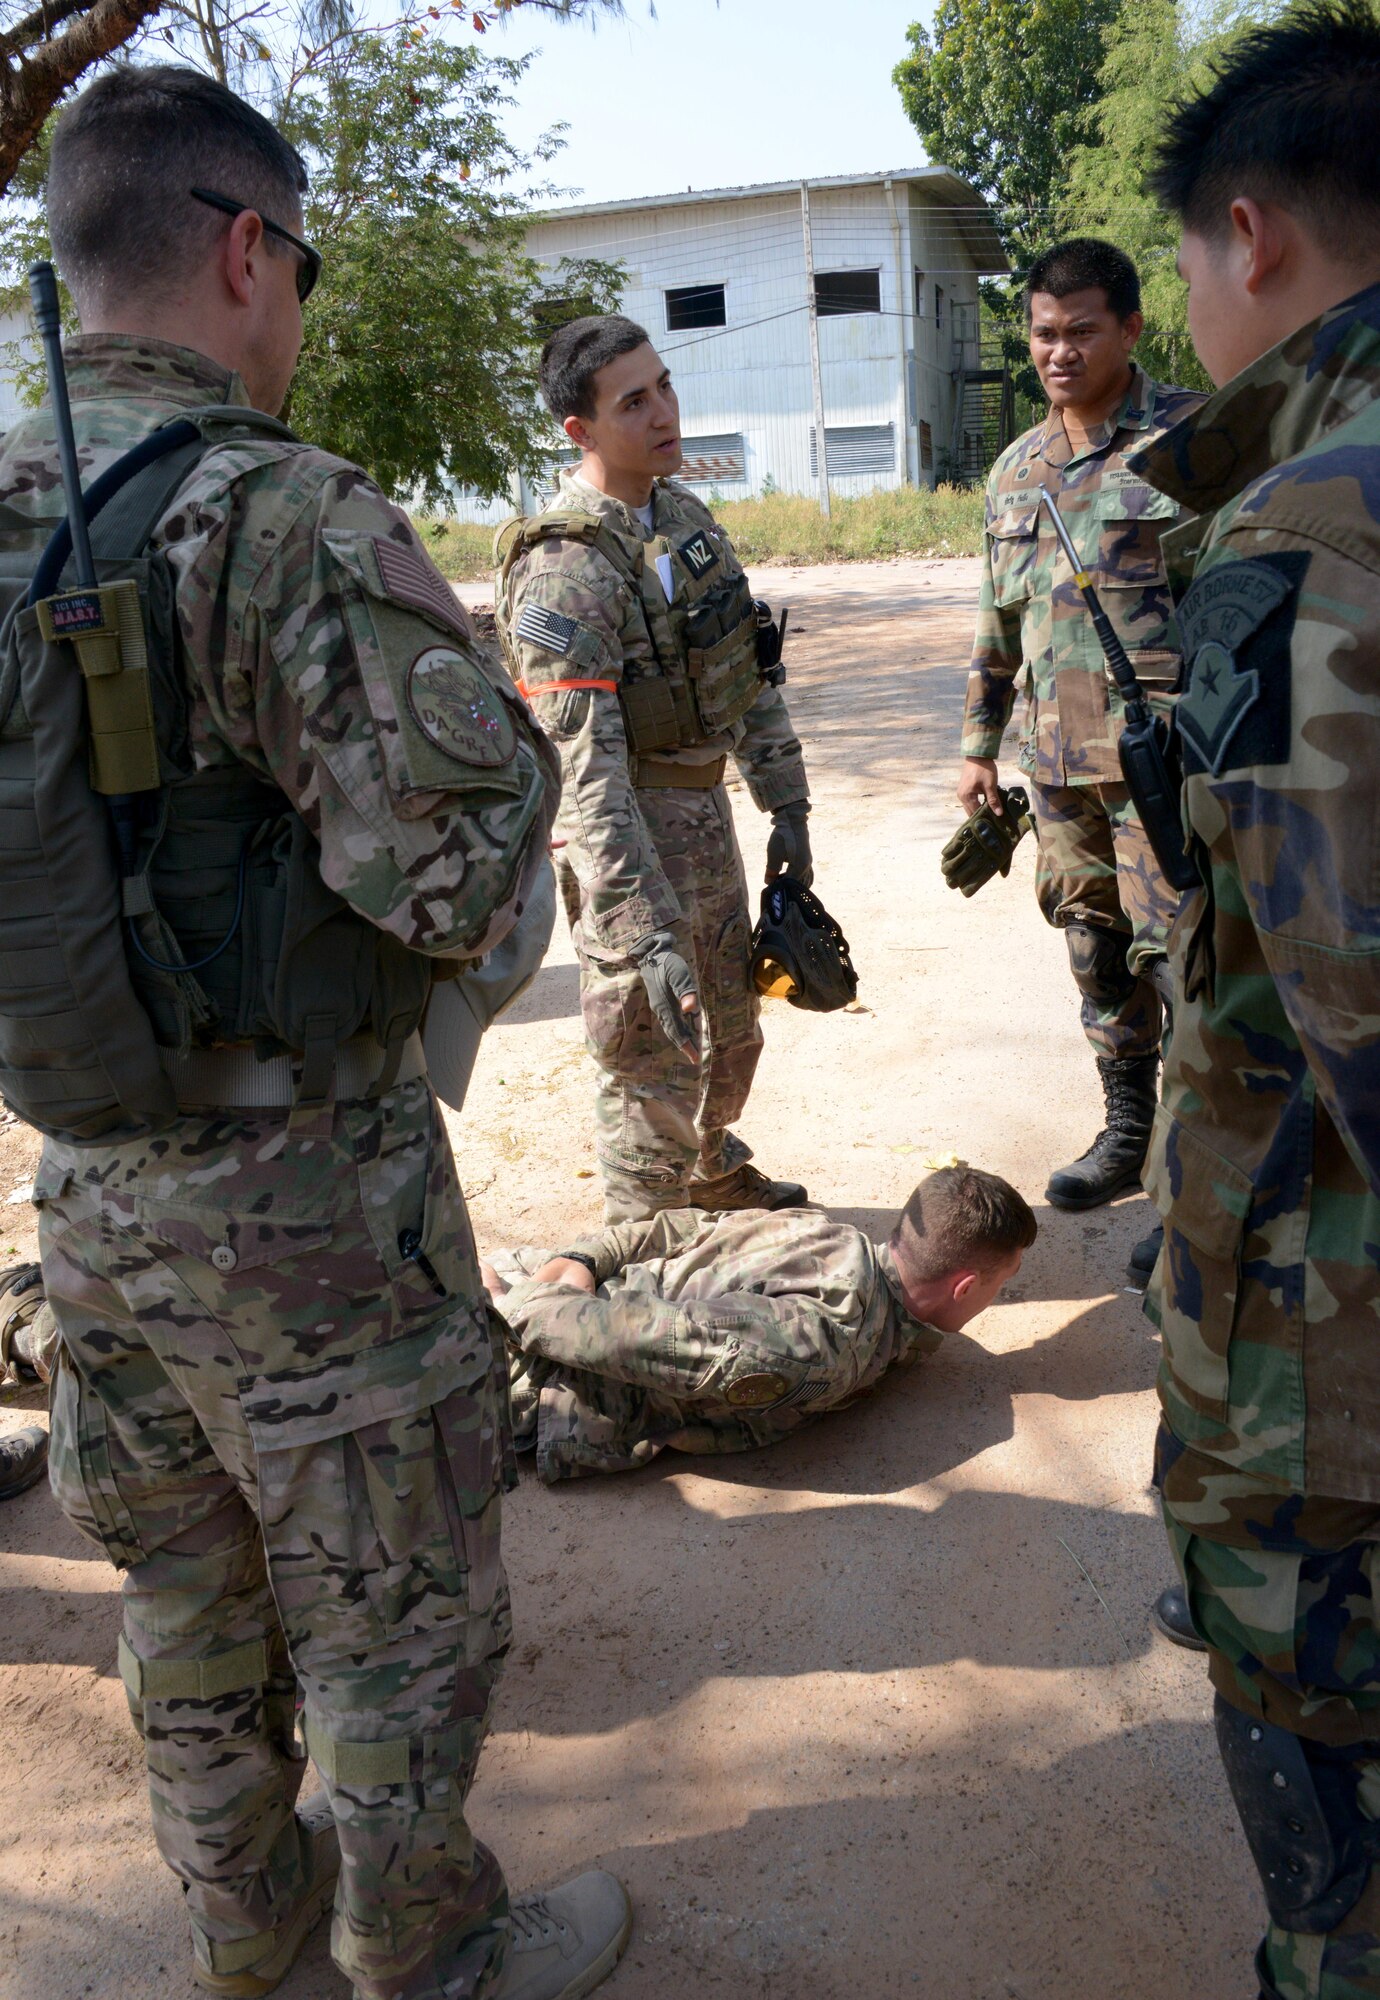 Staff Sgt. Javier Nunez, 353rd Special Operations Support Squadron, Deployed Aircraft Ground Response Element team member, demonstrates how to search a deceased person during a close quarter combat training scenario held Jan. 31, 2014 during Exercise Teak Torch held in Udon Thani, Thailand. This scenario-based training gave both the 353rd Special Operations Support Squadron DAGRE Team and their Royal Thai Air Force counterparts an opportunity to share different tactics and techniques. (U.S. Air Force photo by Tech. Sgt. Kristine Dreyer)